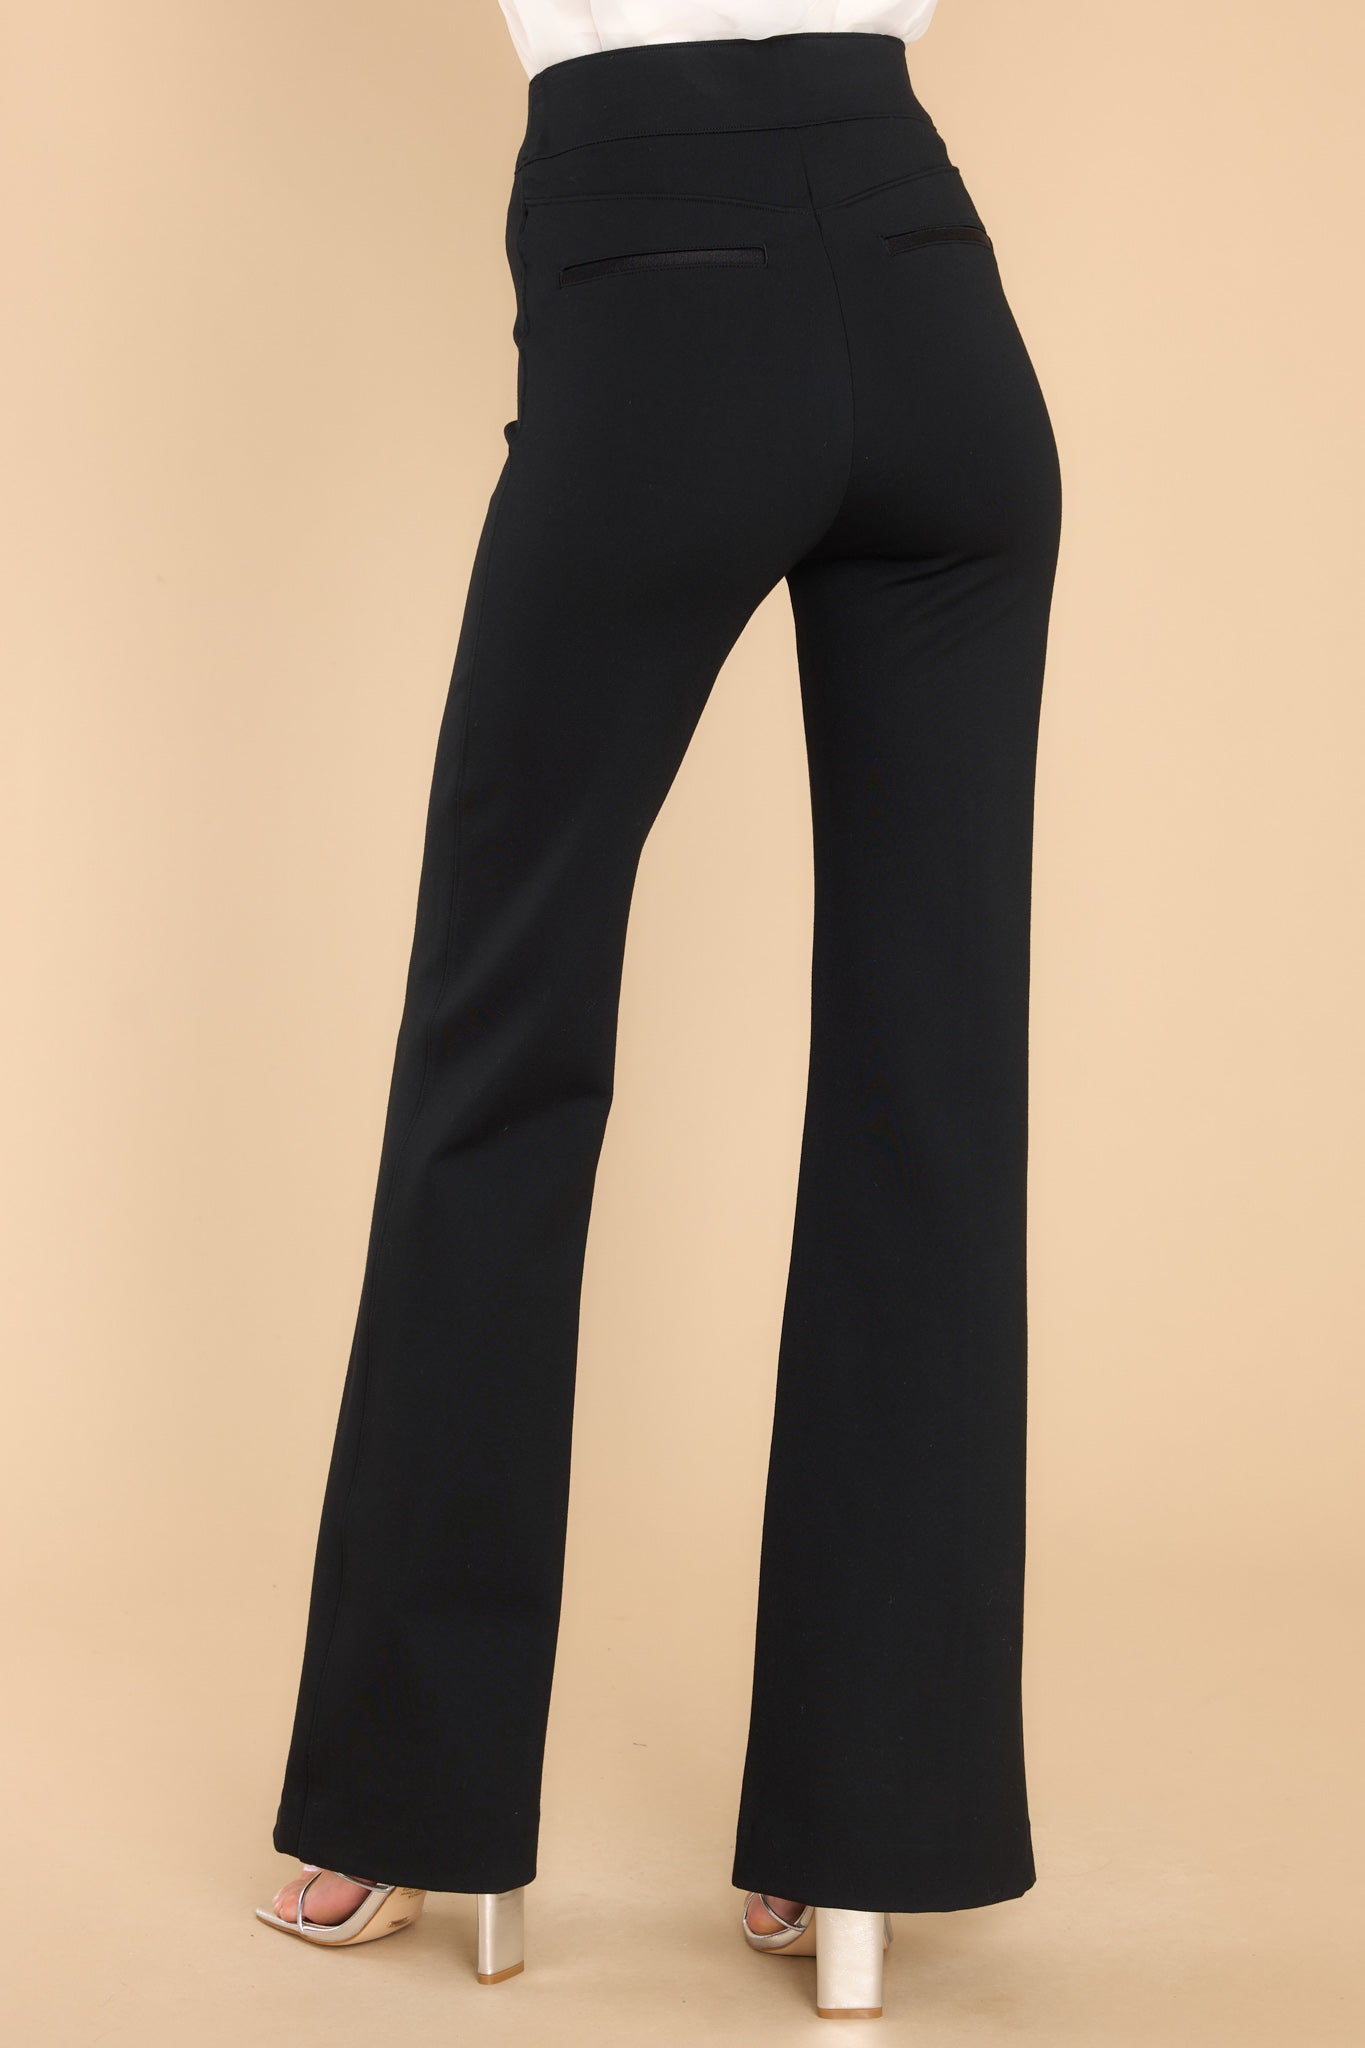 Spanx The Perfect Pant Ankle Length Women's Size Small Black 25 Inseam